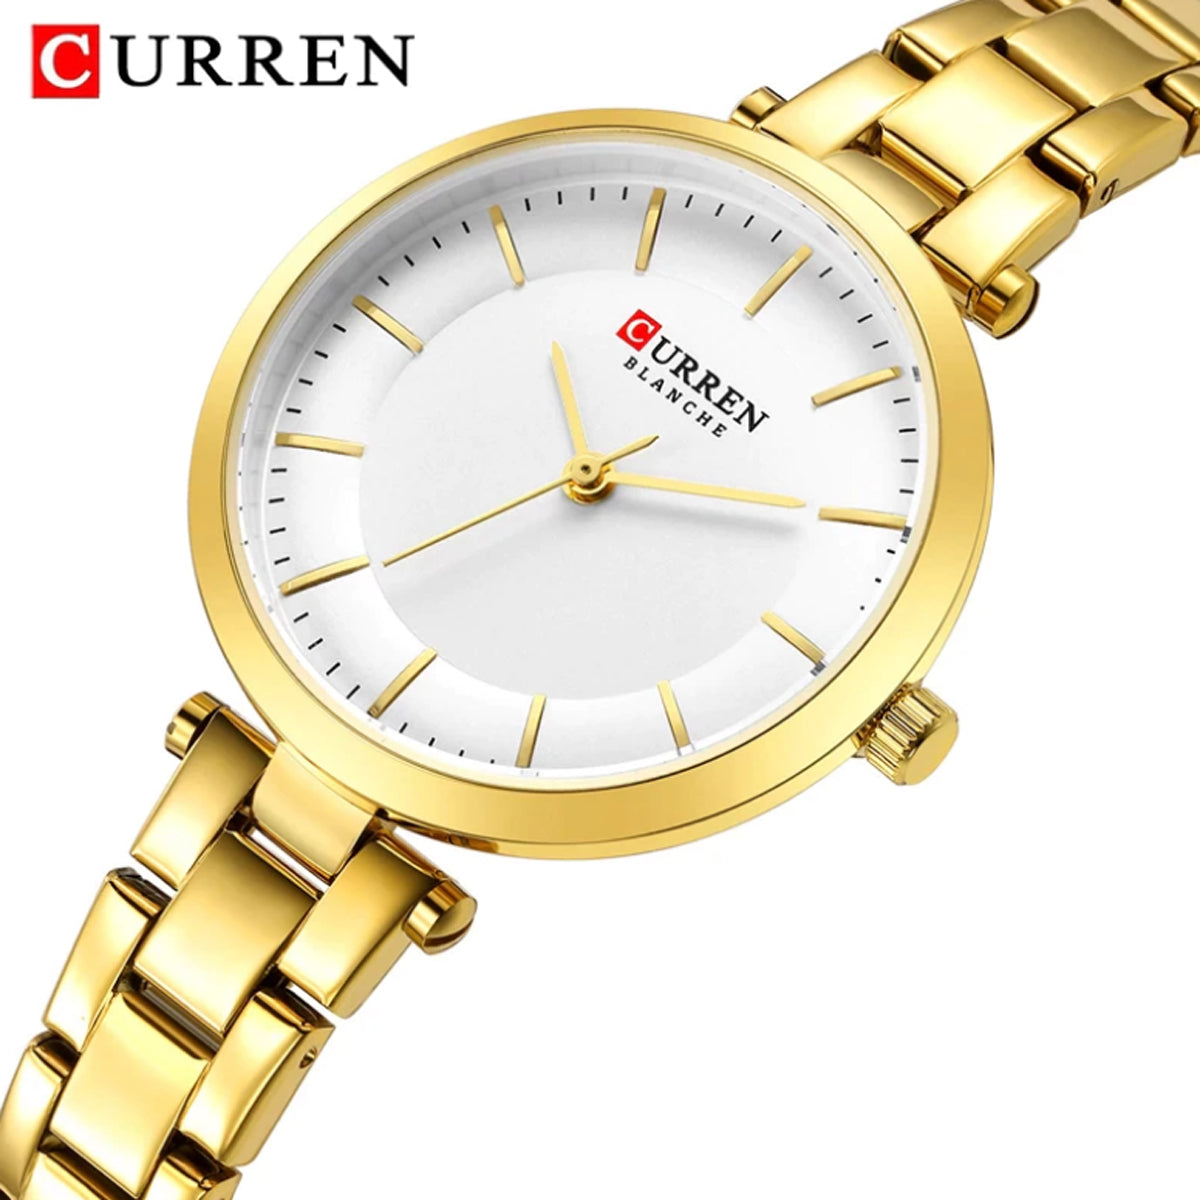 CURREN Original Brand Stainless Steel Band Wrist Watch For Women With Brand (Box & Bag)-9054